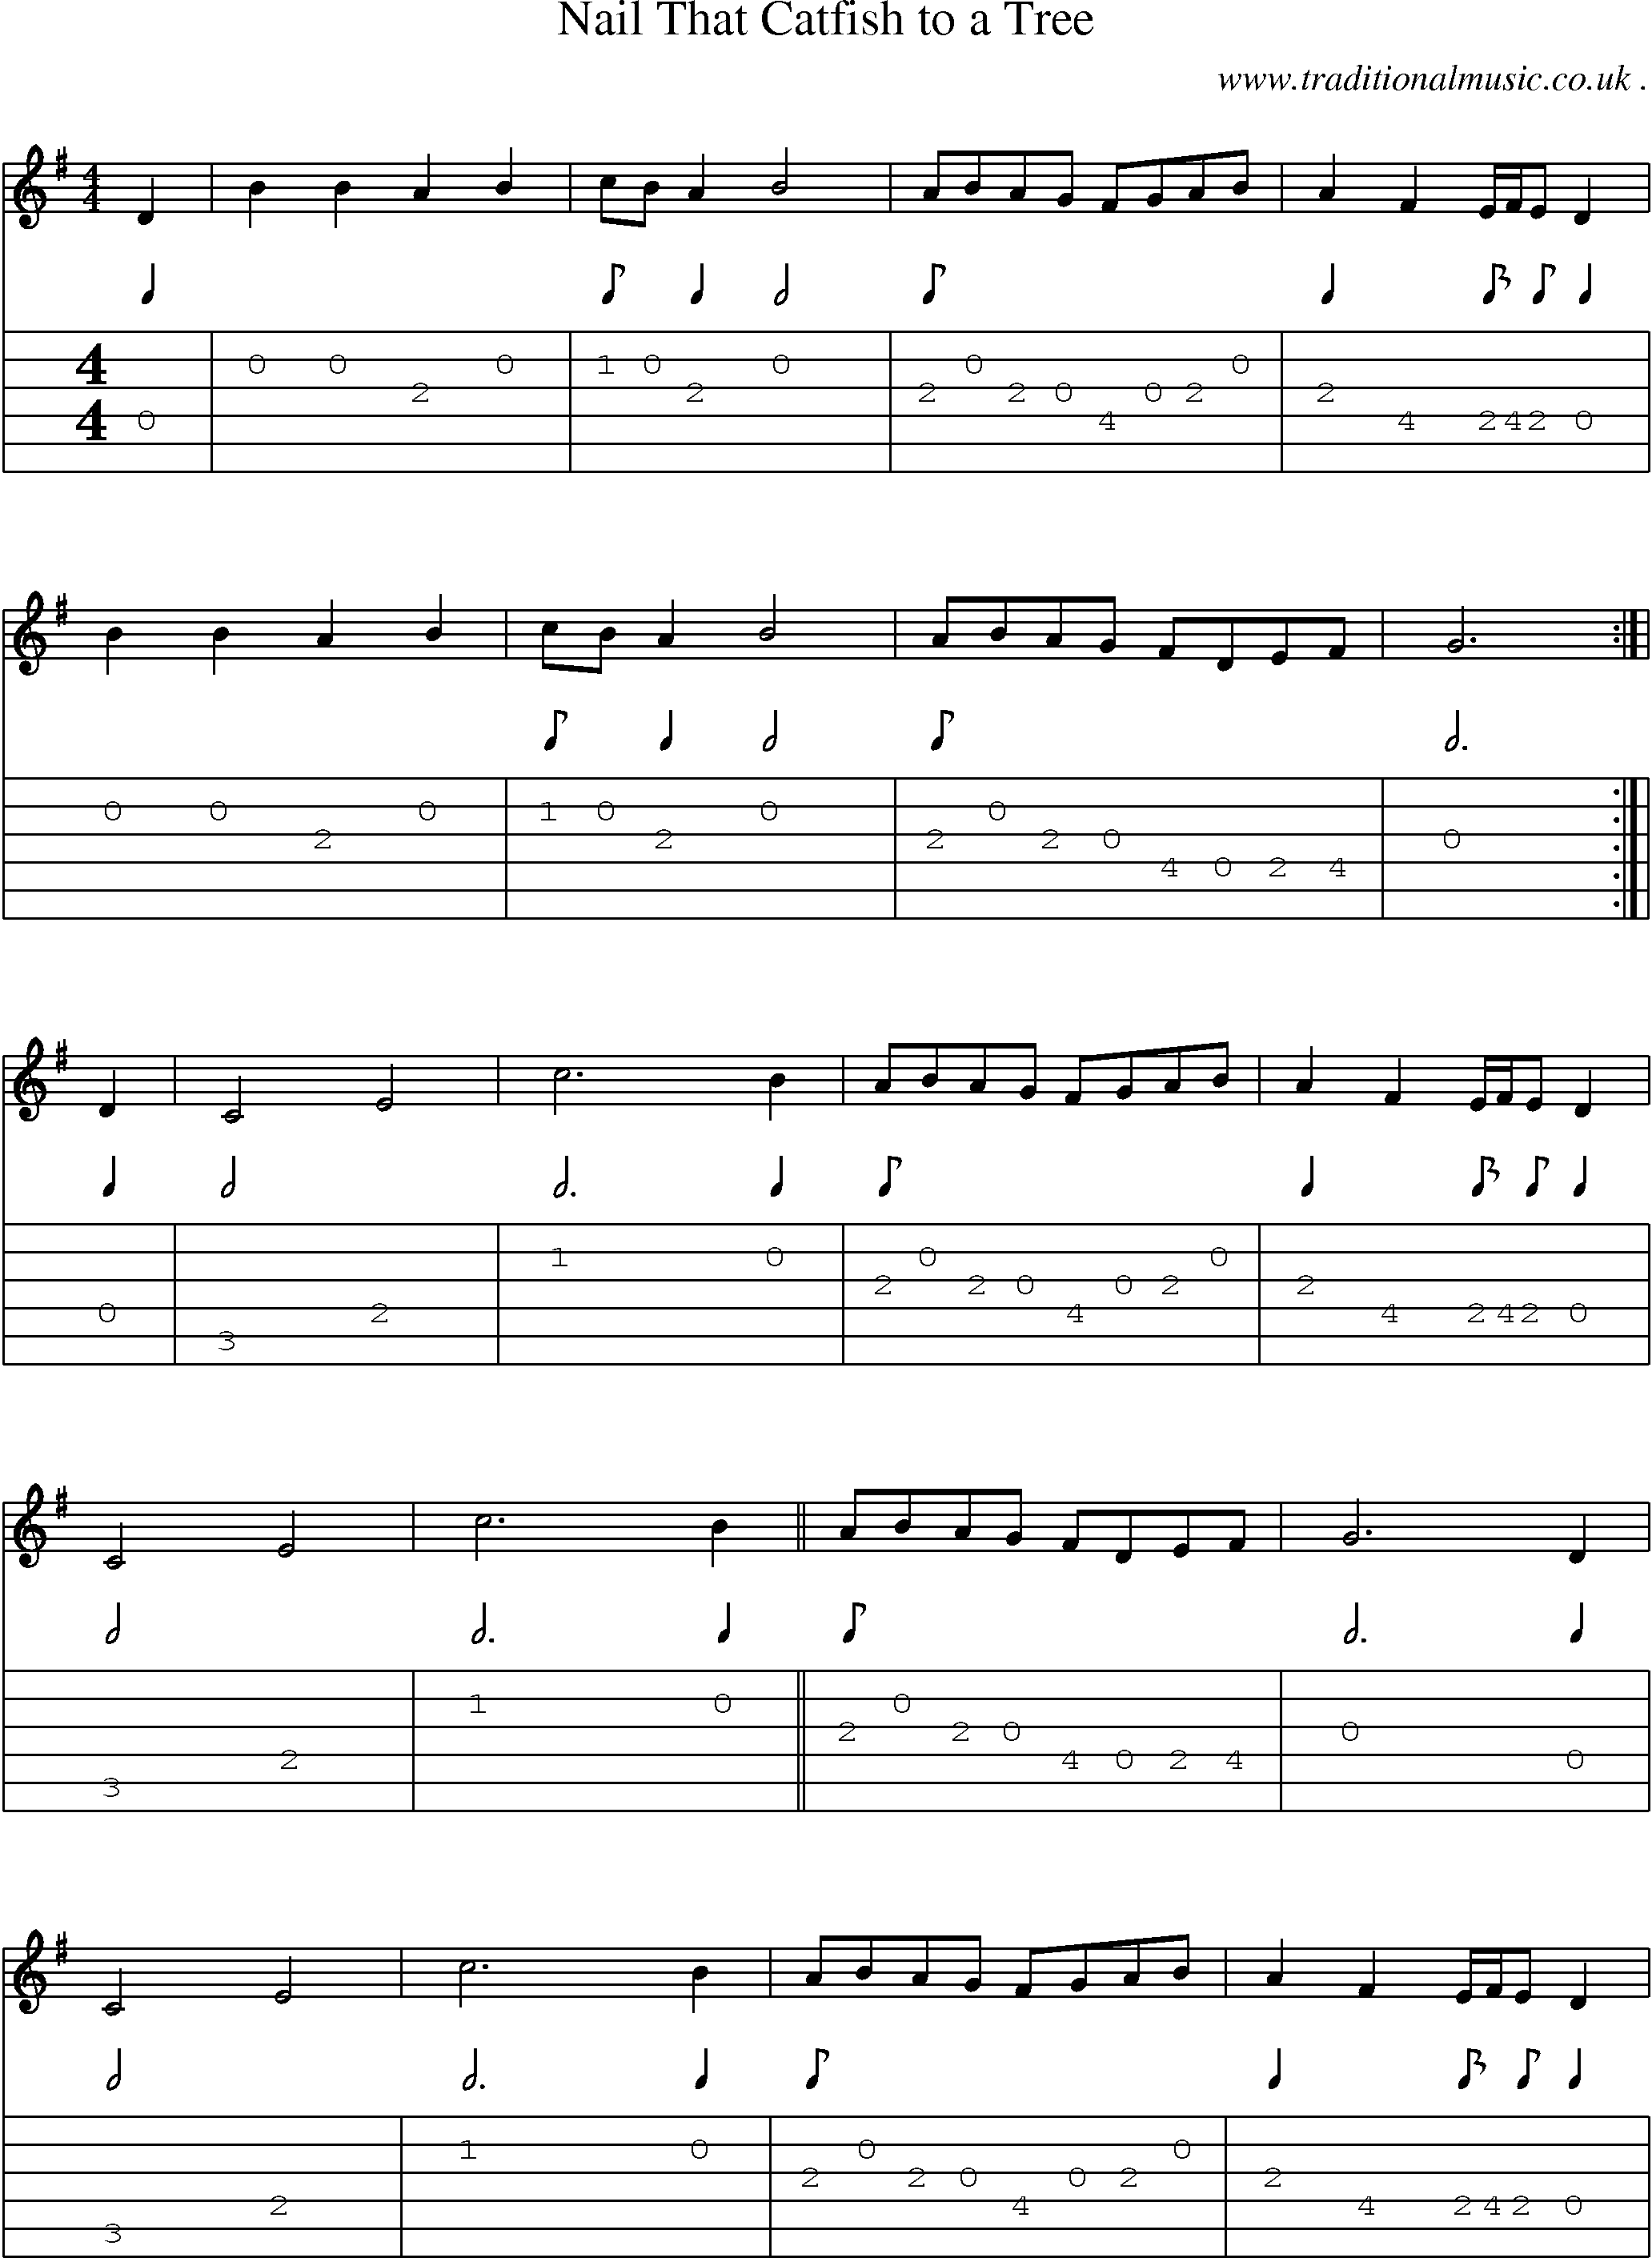 Sheet-Music and Guitar Tabs for Nail That Catfish To A Tree